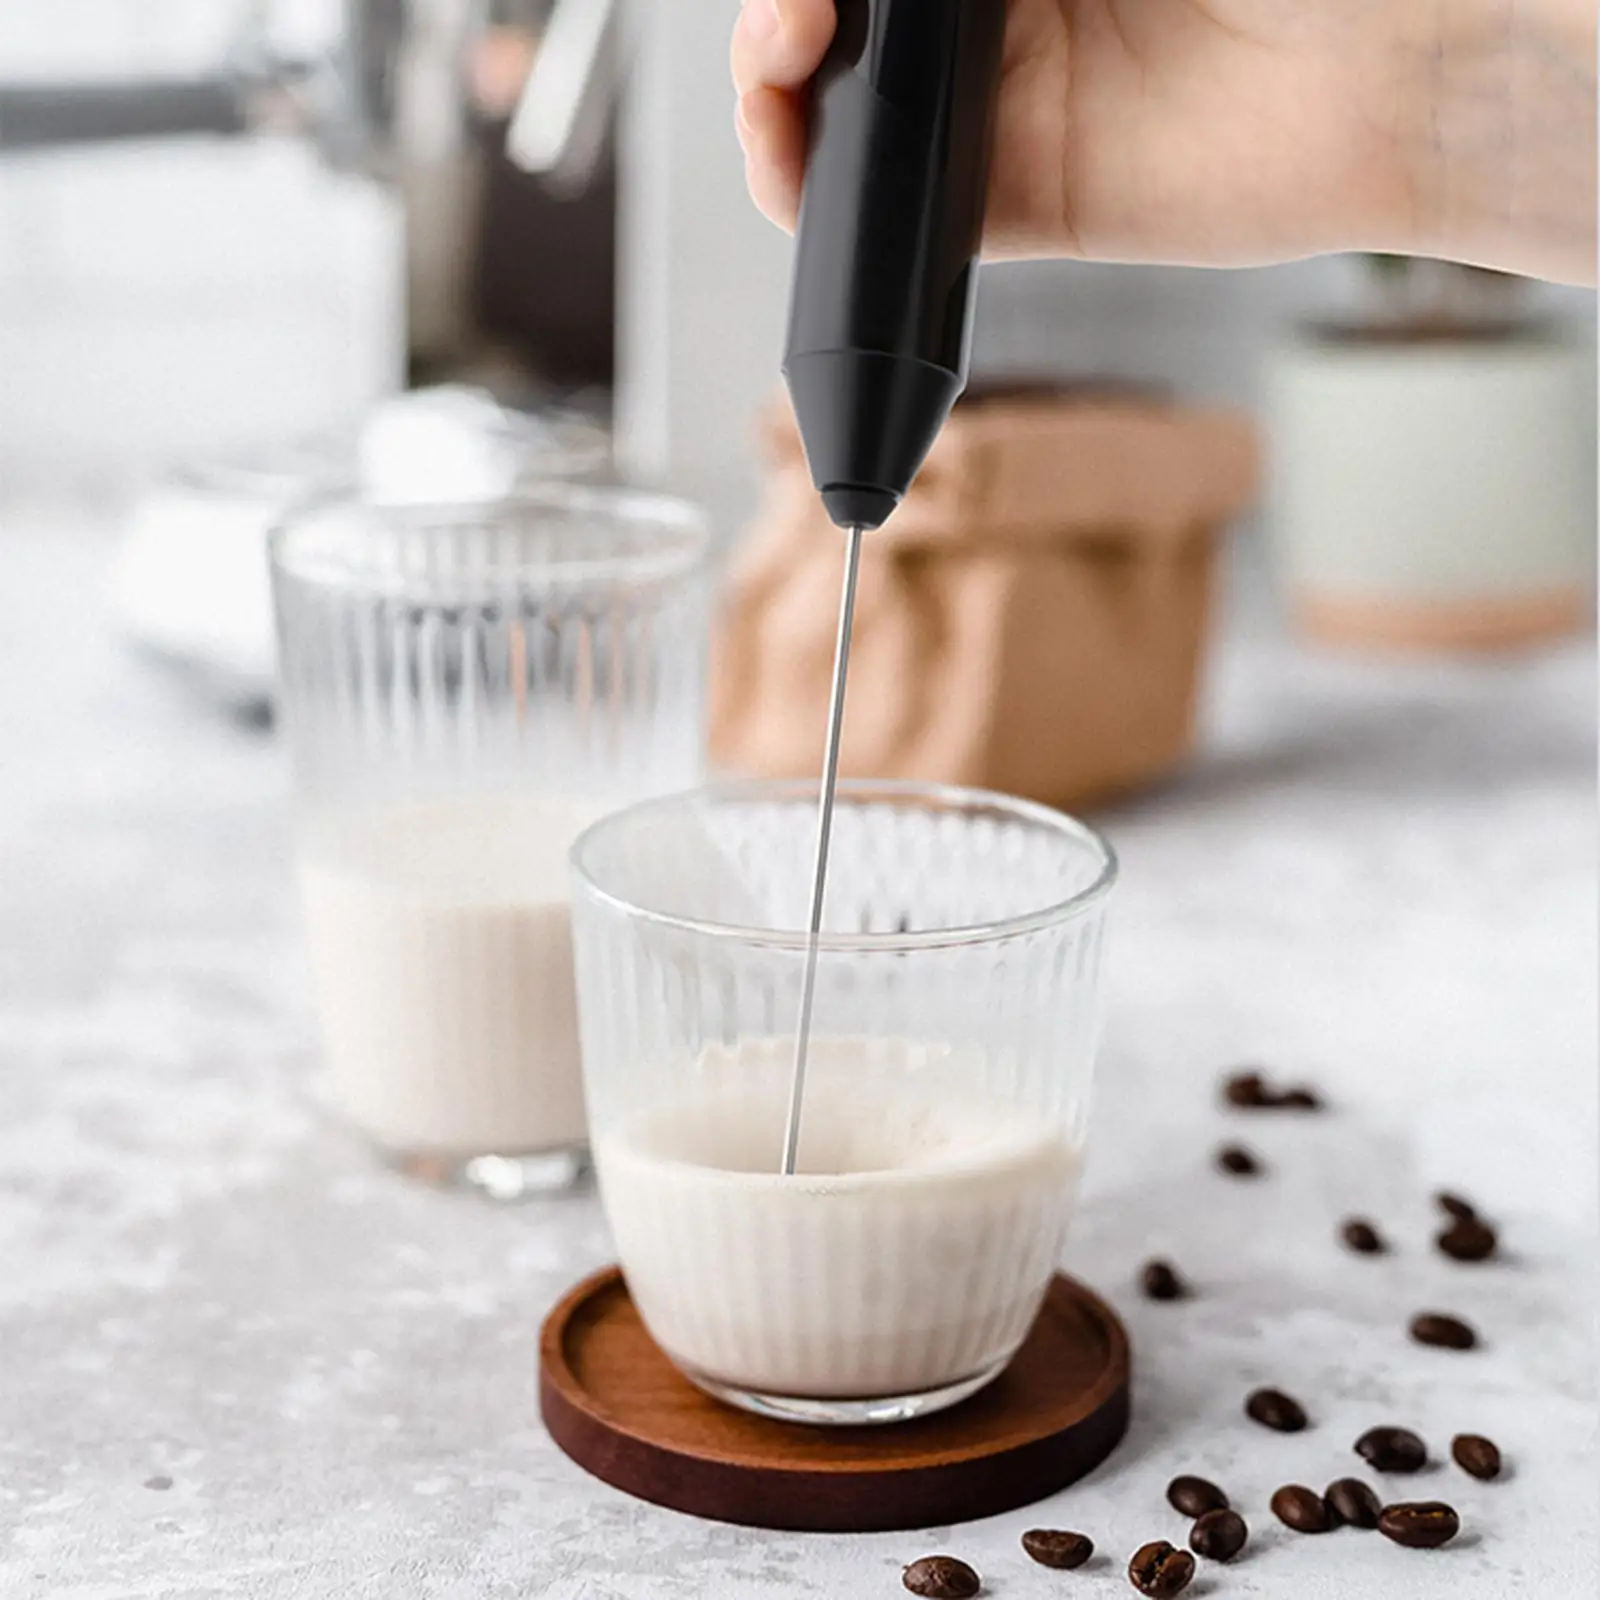 Handheld Electric Frother Mixer Blender Coffee Frother Foam Maker Egg Beater Egg Whisk for Cream Hot Chocolate Coffee Matcha